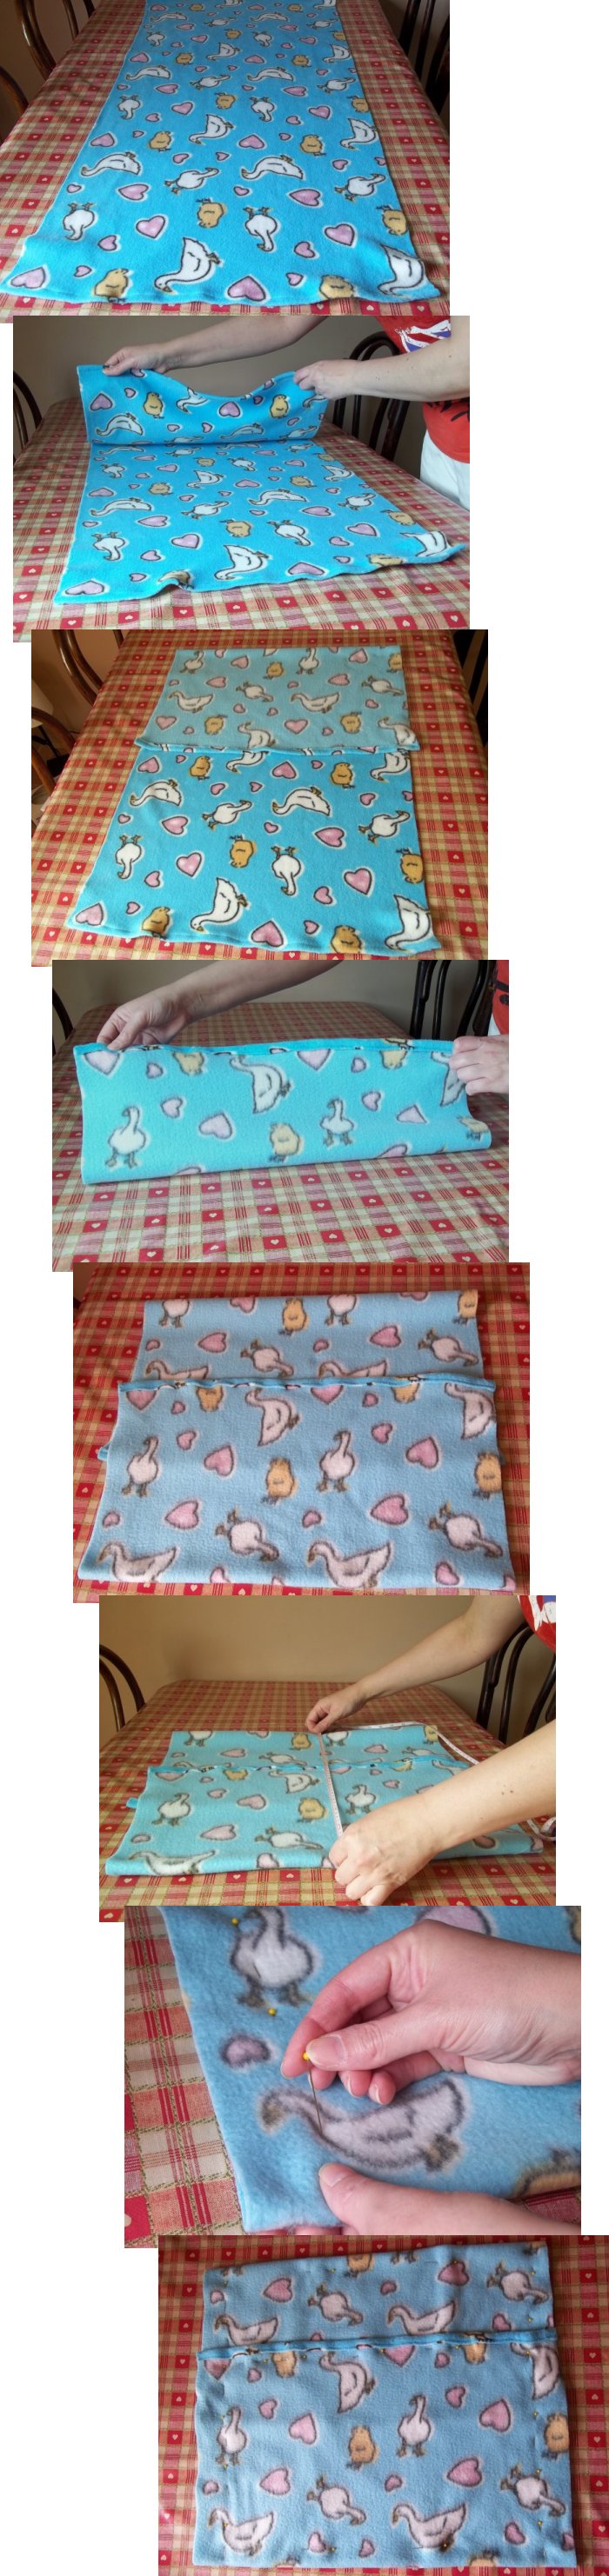 Things to make and do - Envelope cushion